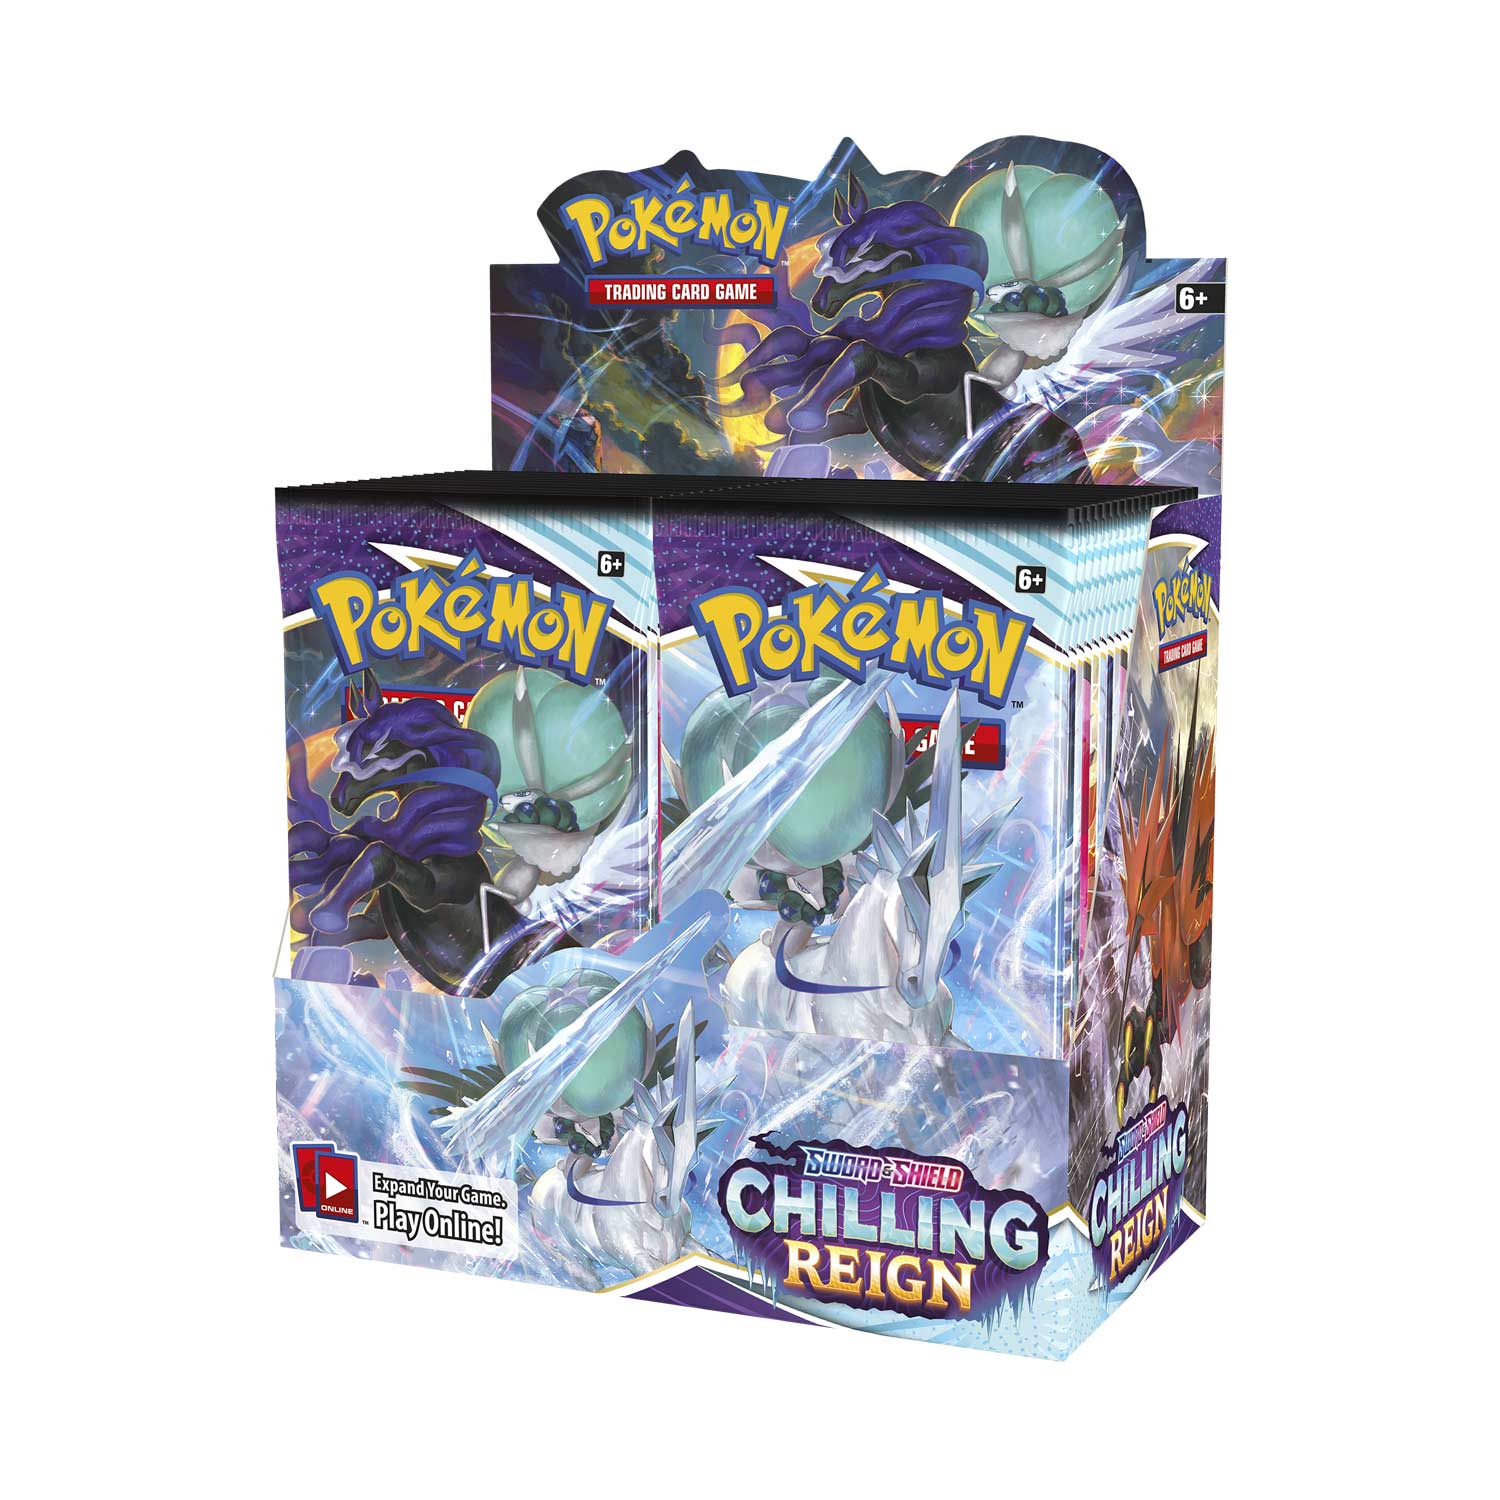 Sword & Shield: Chilling Reign - Booster Box (ugly shrink wrap)